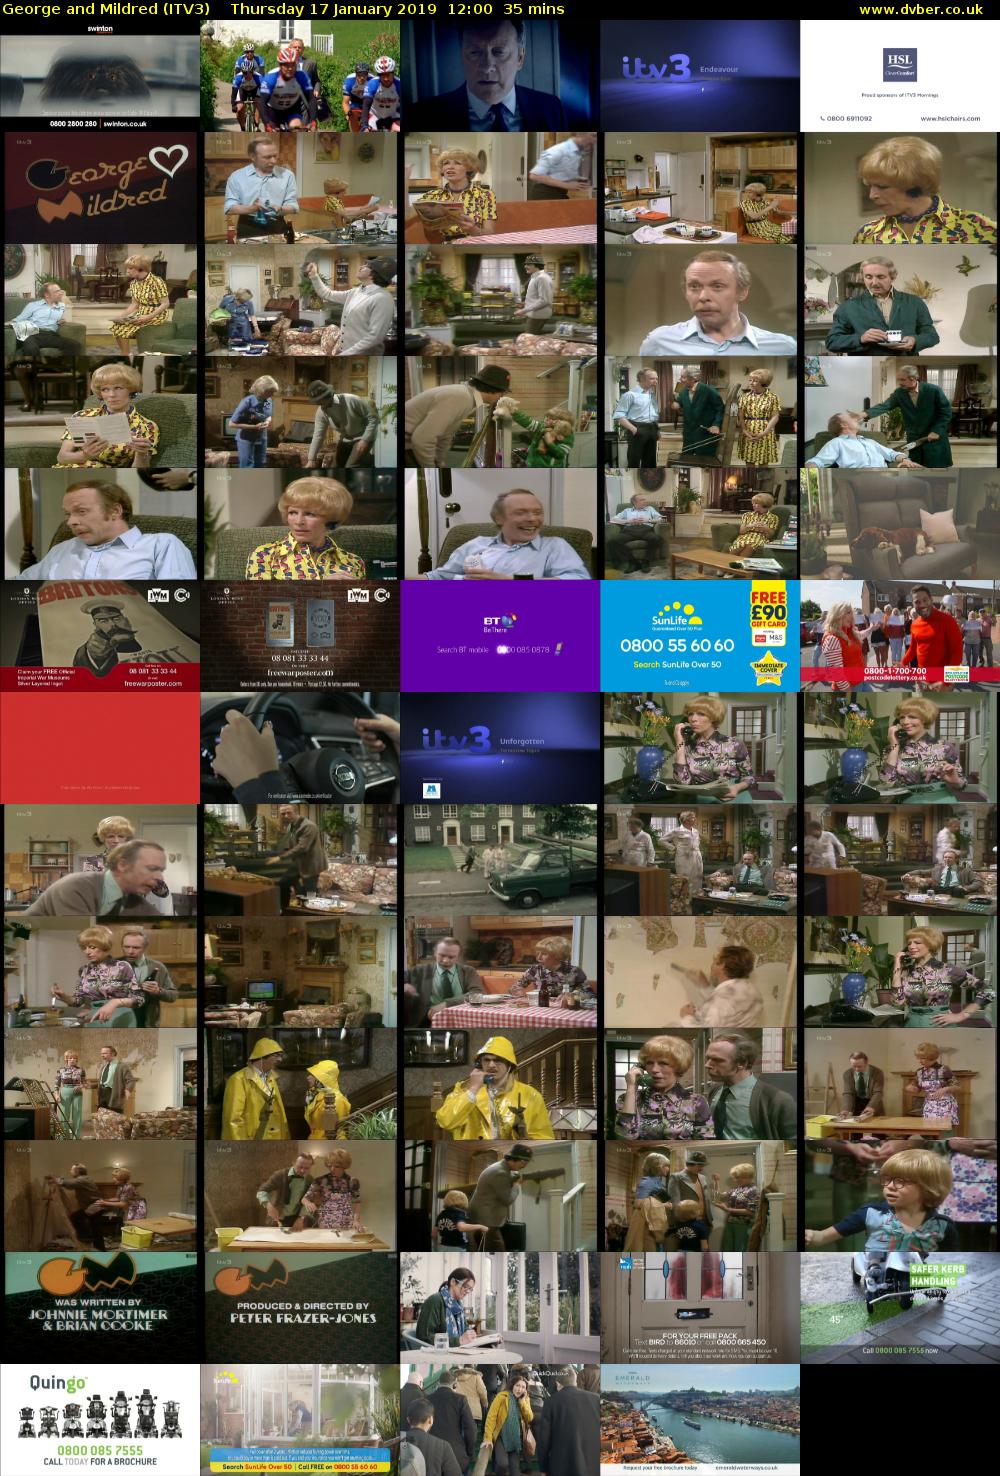 George and Mildred (ITV3) Thursday 17 January 2019 12:00 - 12:35